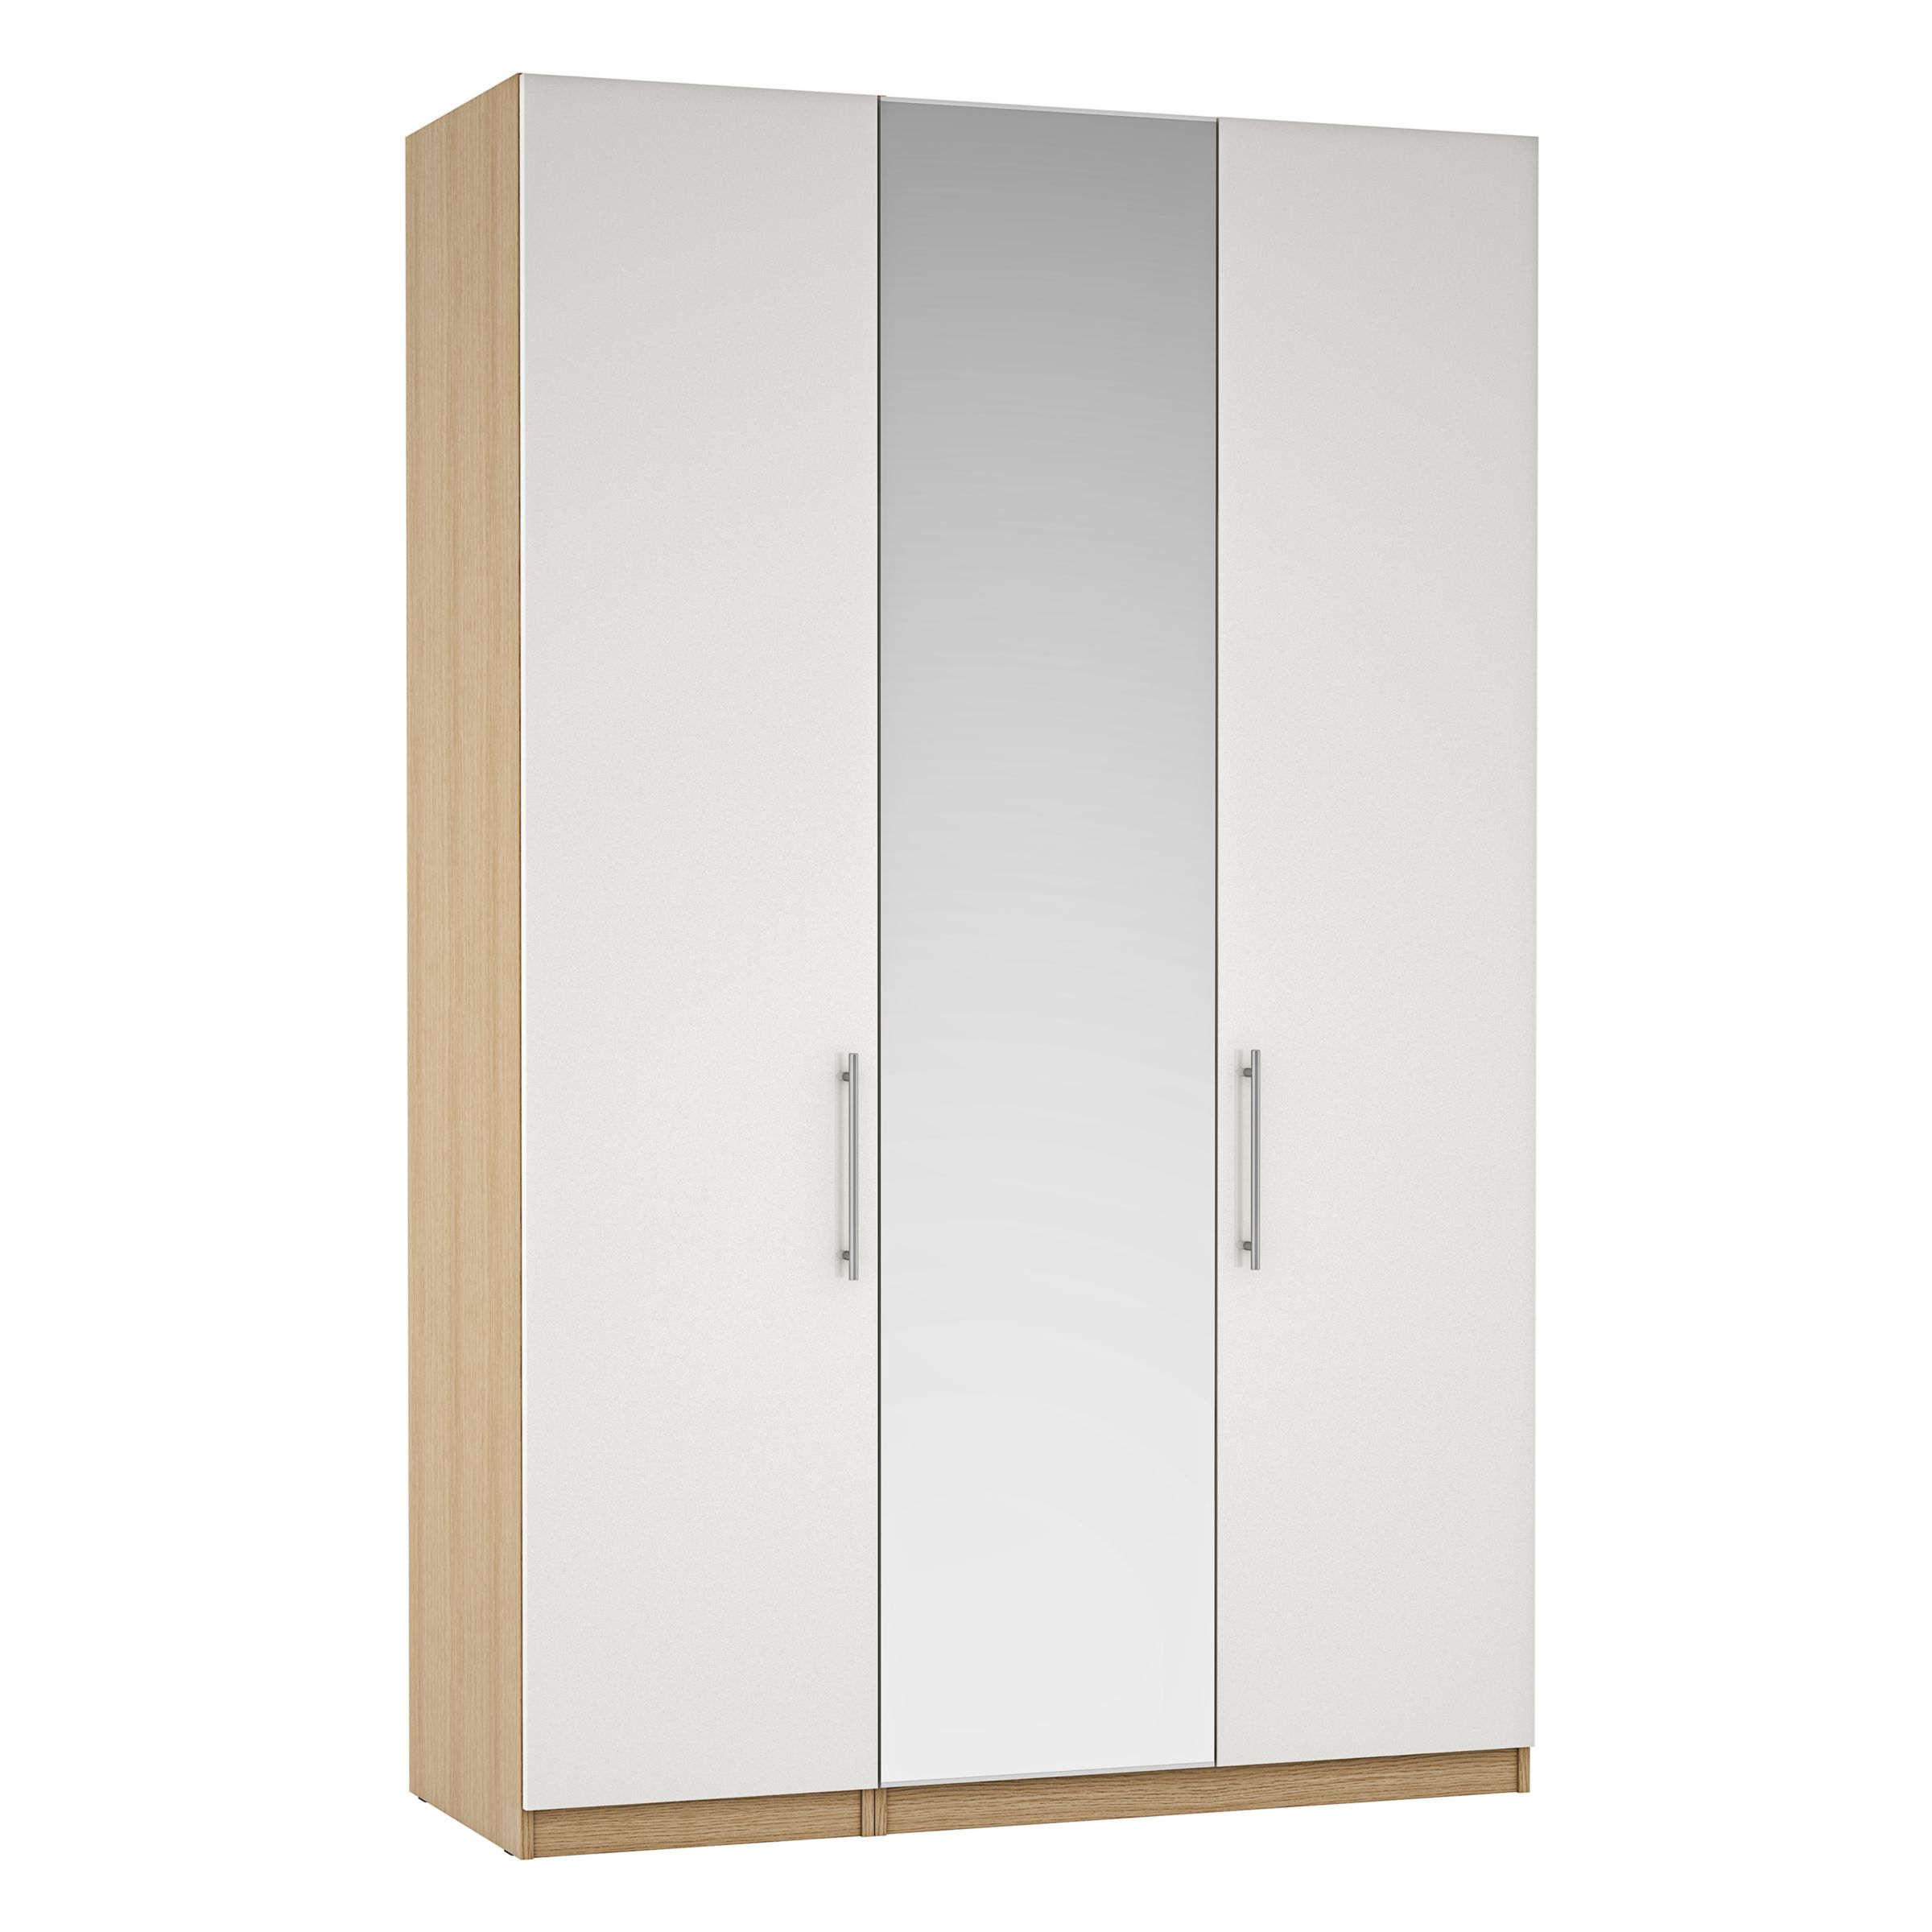 Photo of John lewis anyday mix it tall mirrored triple wardrobe with t-bar handles gloss white/natural oak